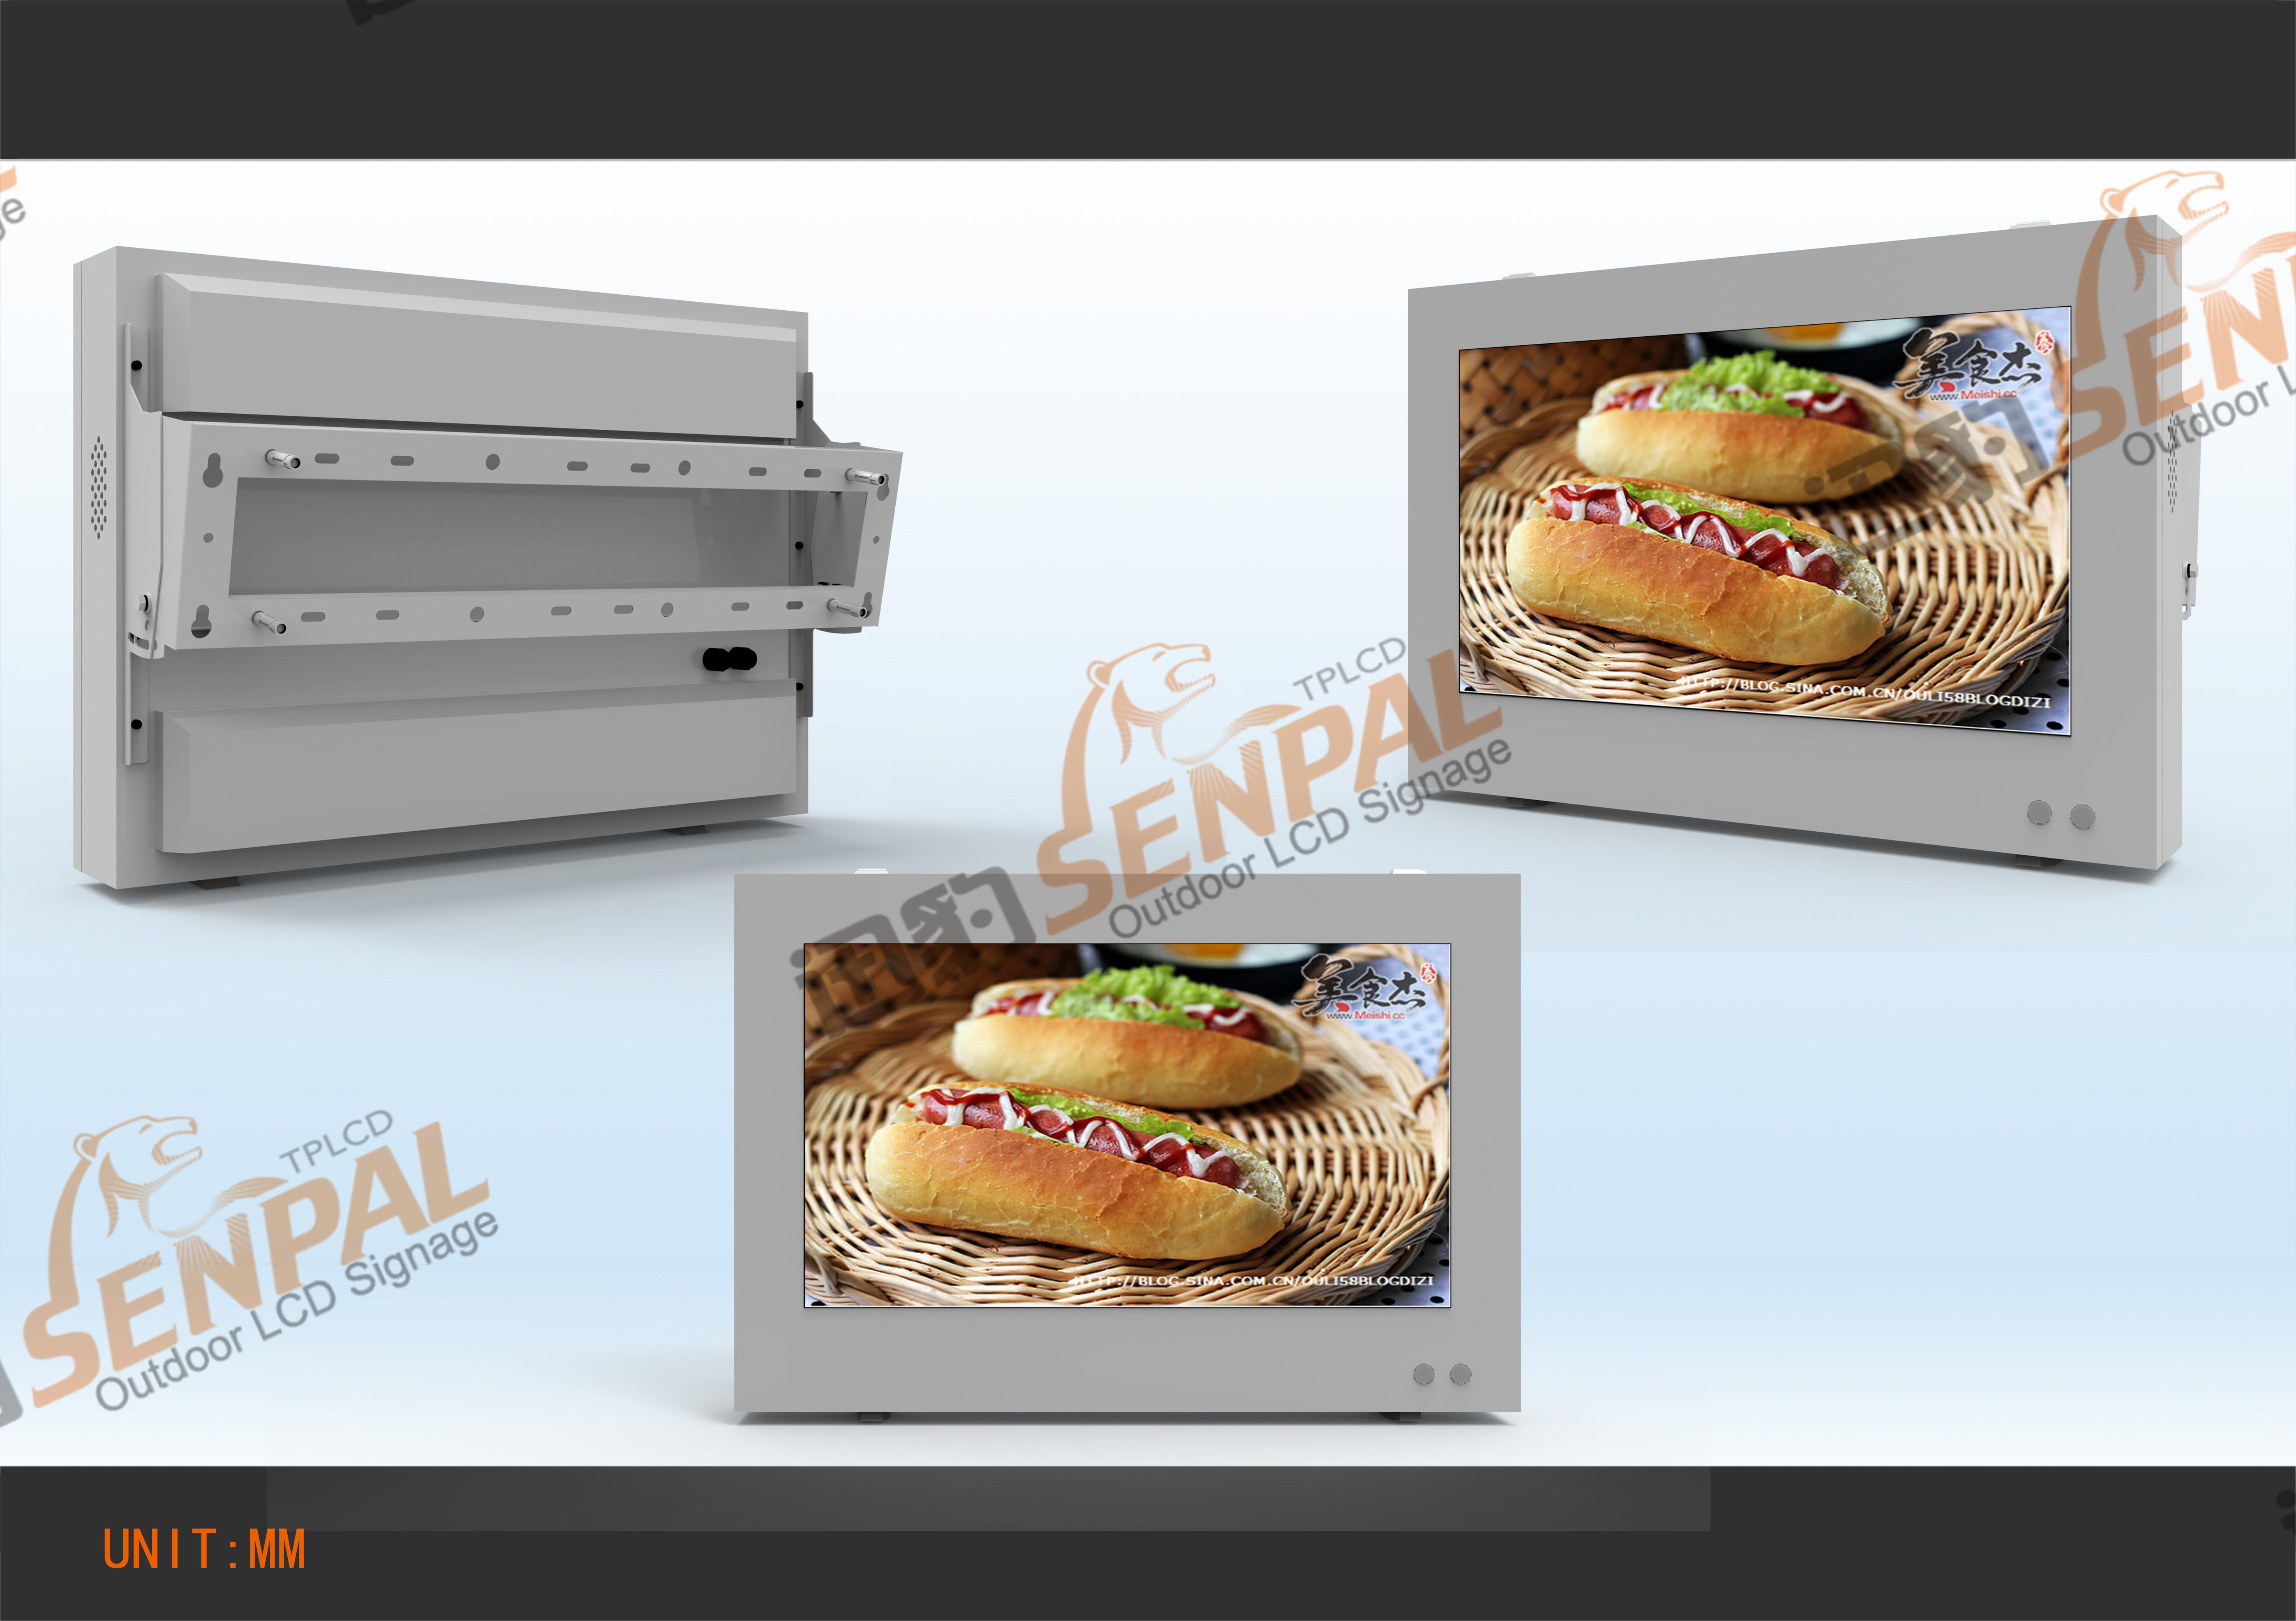 Why You Should Consider Buying Senpal Outdoor LCD Display?